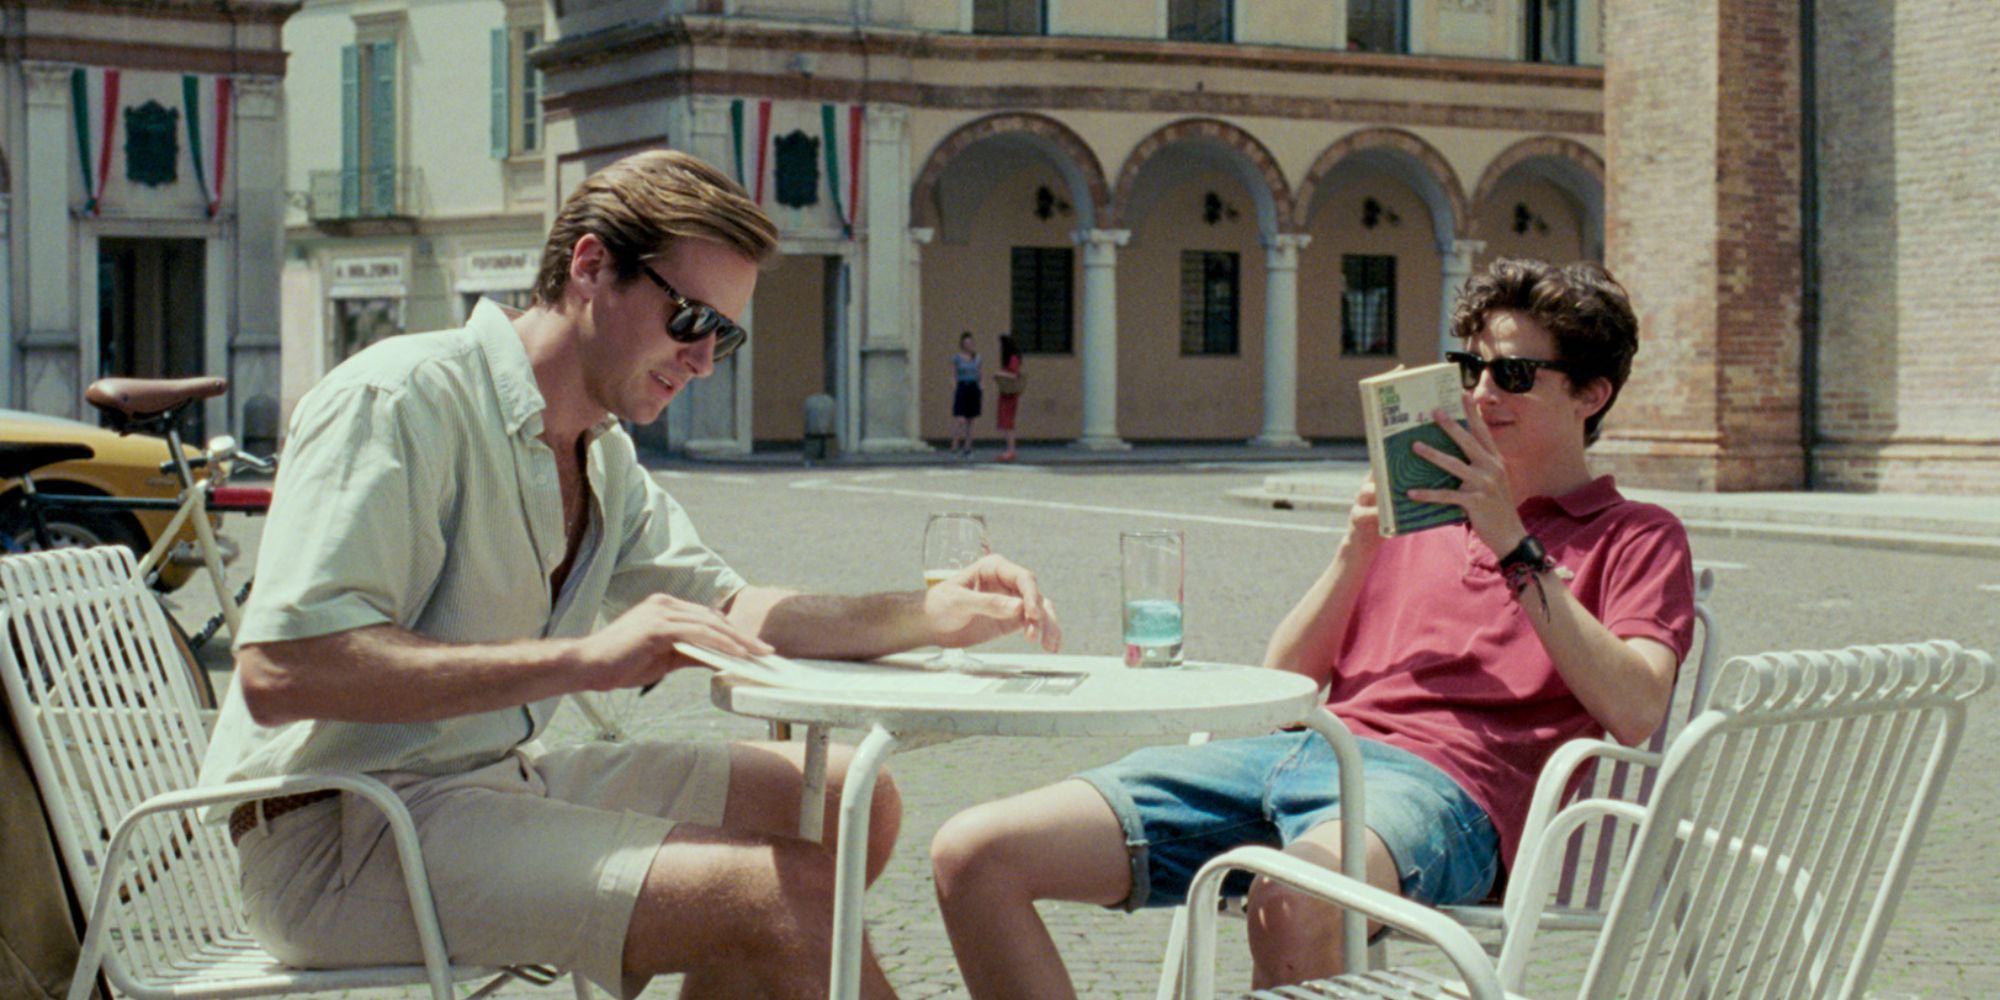 Timoth e Chalamet and Armie Hammer in Call Me by Your Name sitting on a table together with drinks